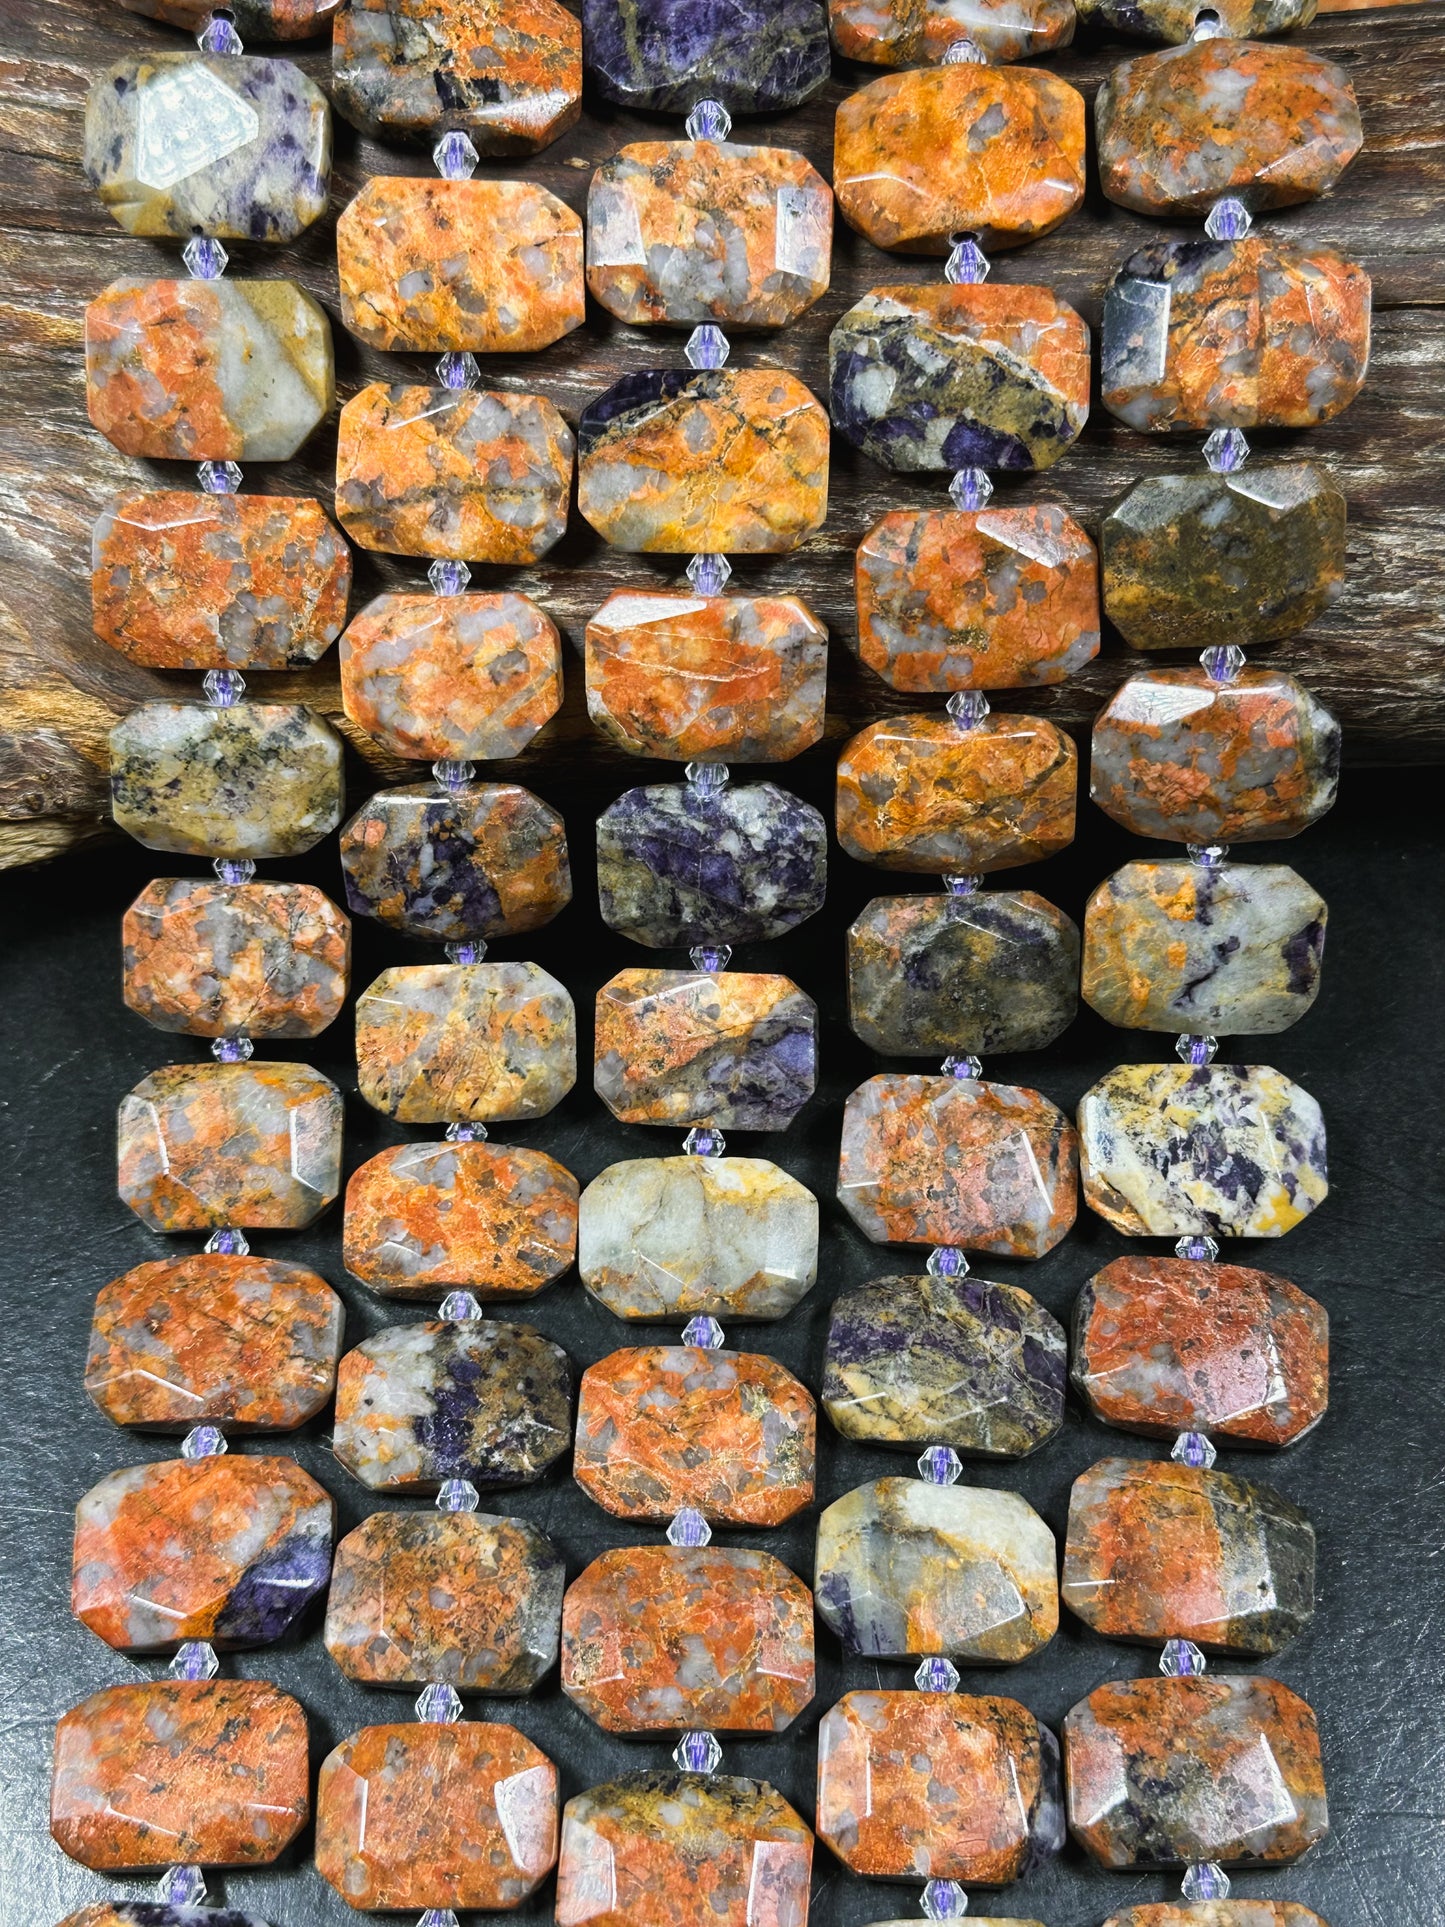 Natural Crazy Lace Agate Gemstone Bead Faceted 22x15mm Rectangle Shape, Beautiful Multicolor Orange Purple Gray Crazy Lace Agate Bead, 15.5"